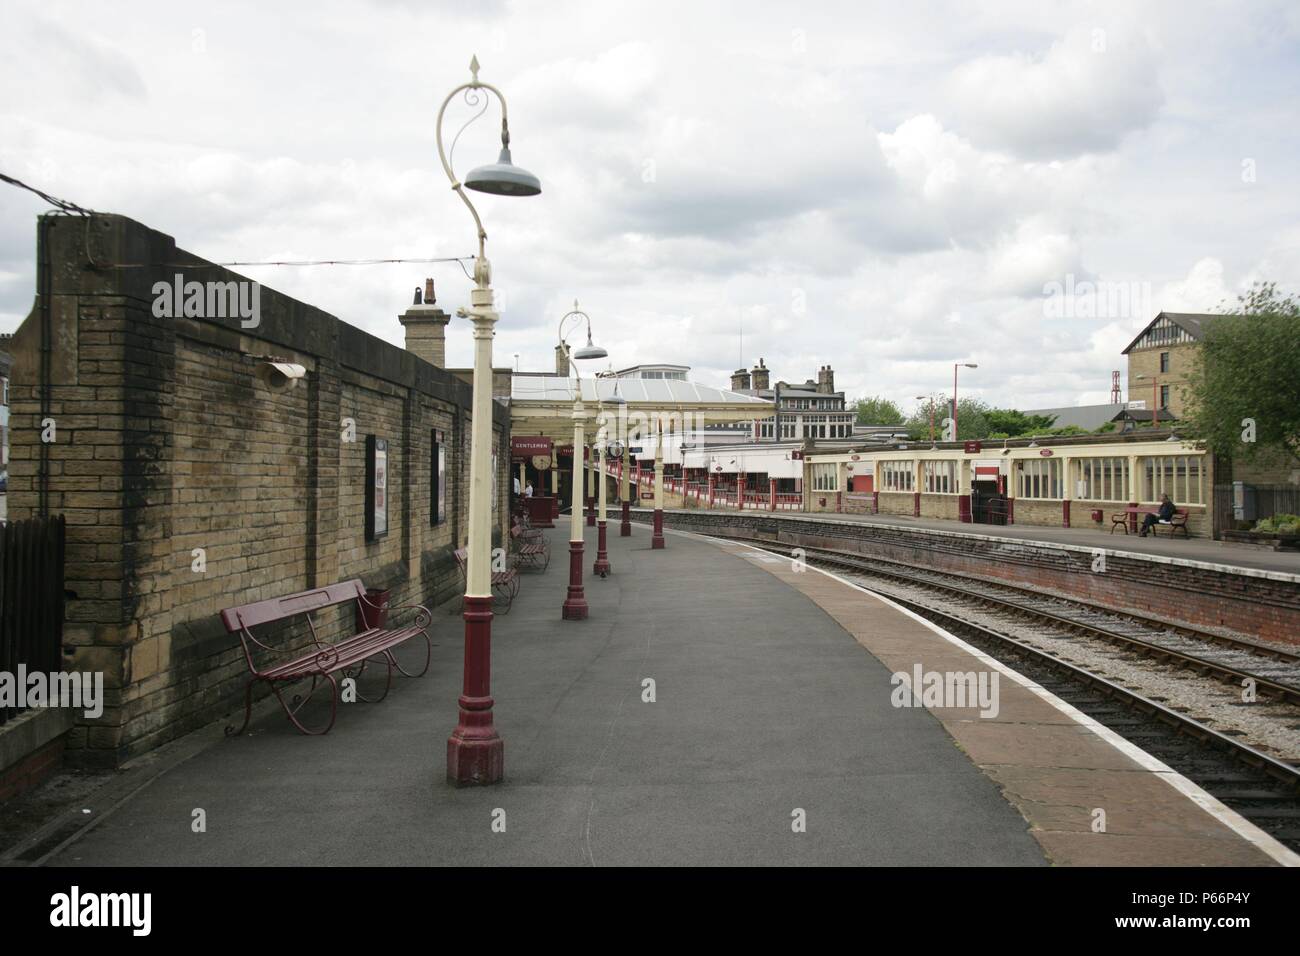 General view of the Keighley and Worth Valley Railway platforms at Keighley station, Yorkshire, showing the heritage seating and lighting. 2007 Stock Photo